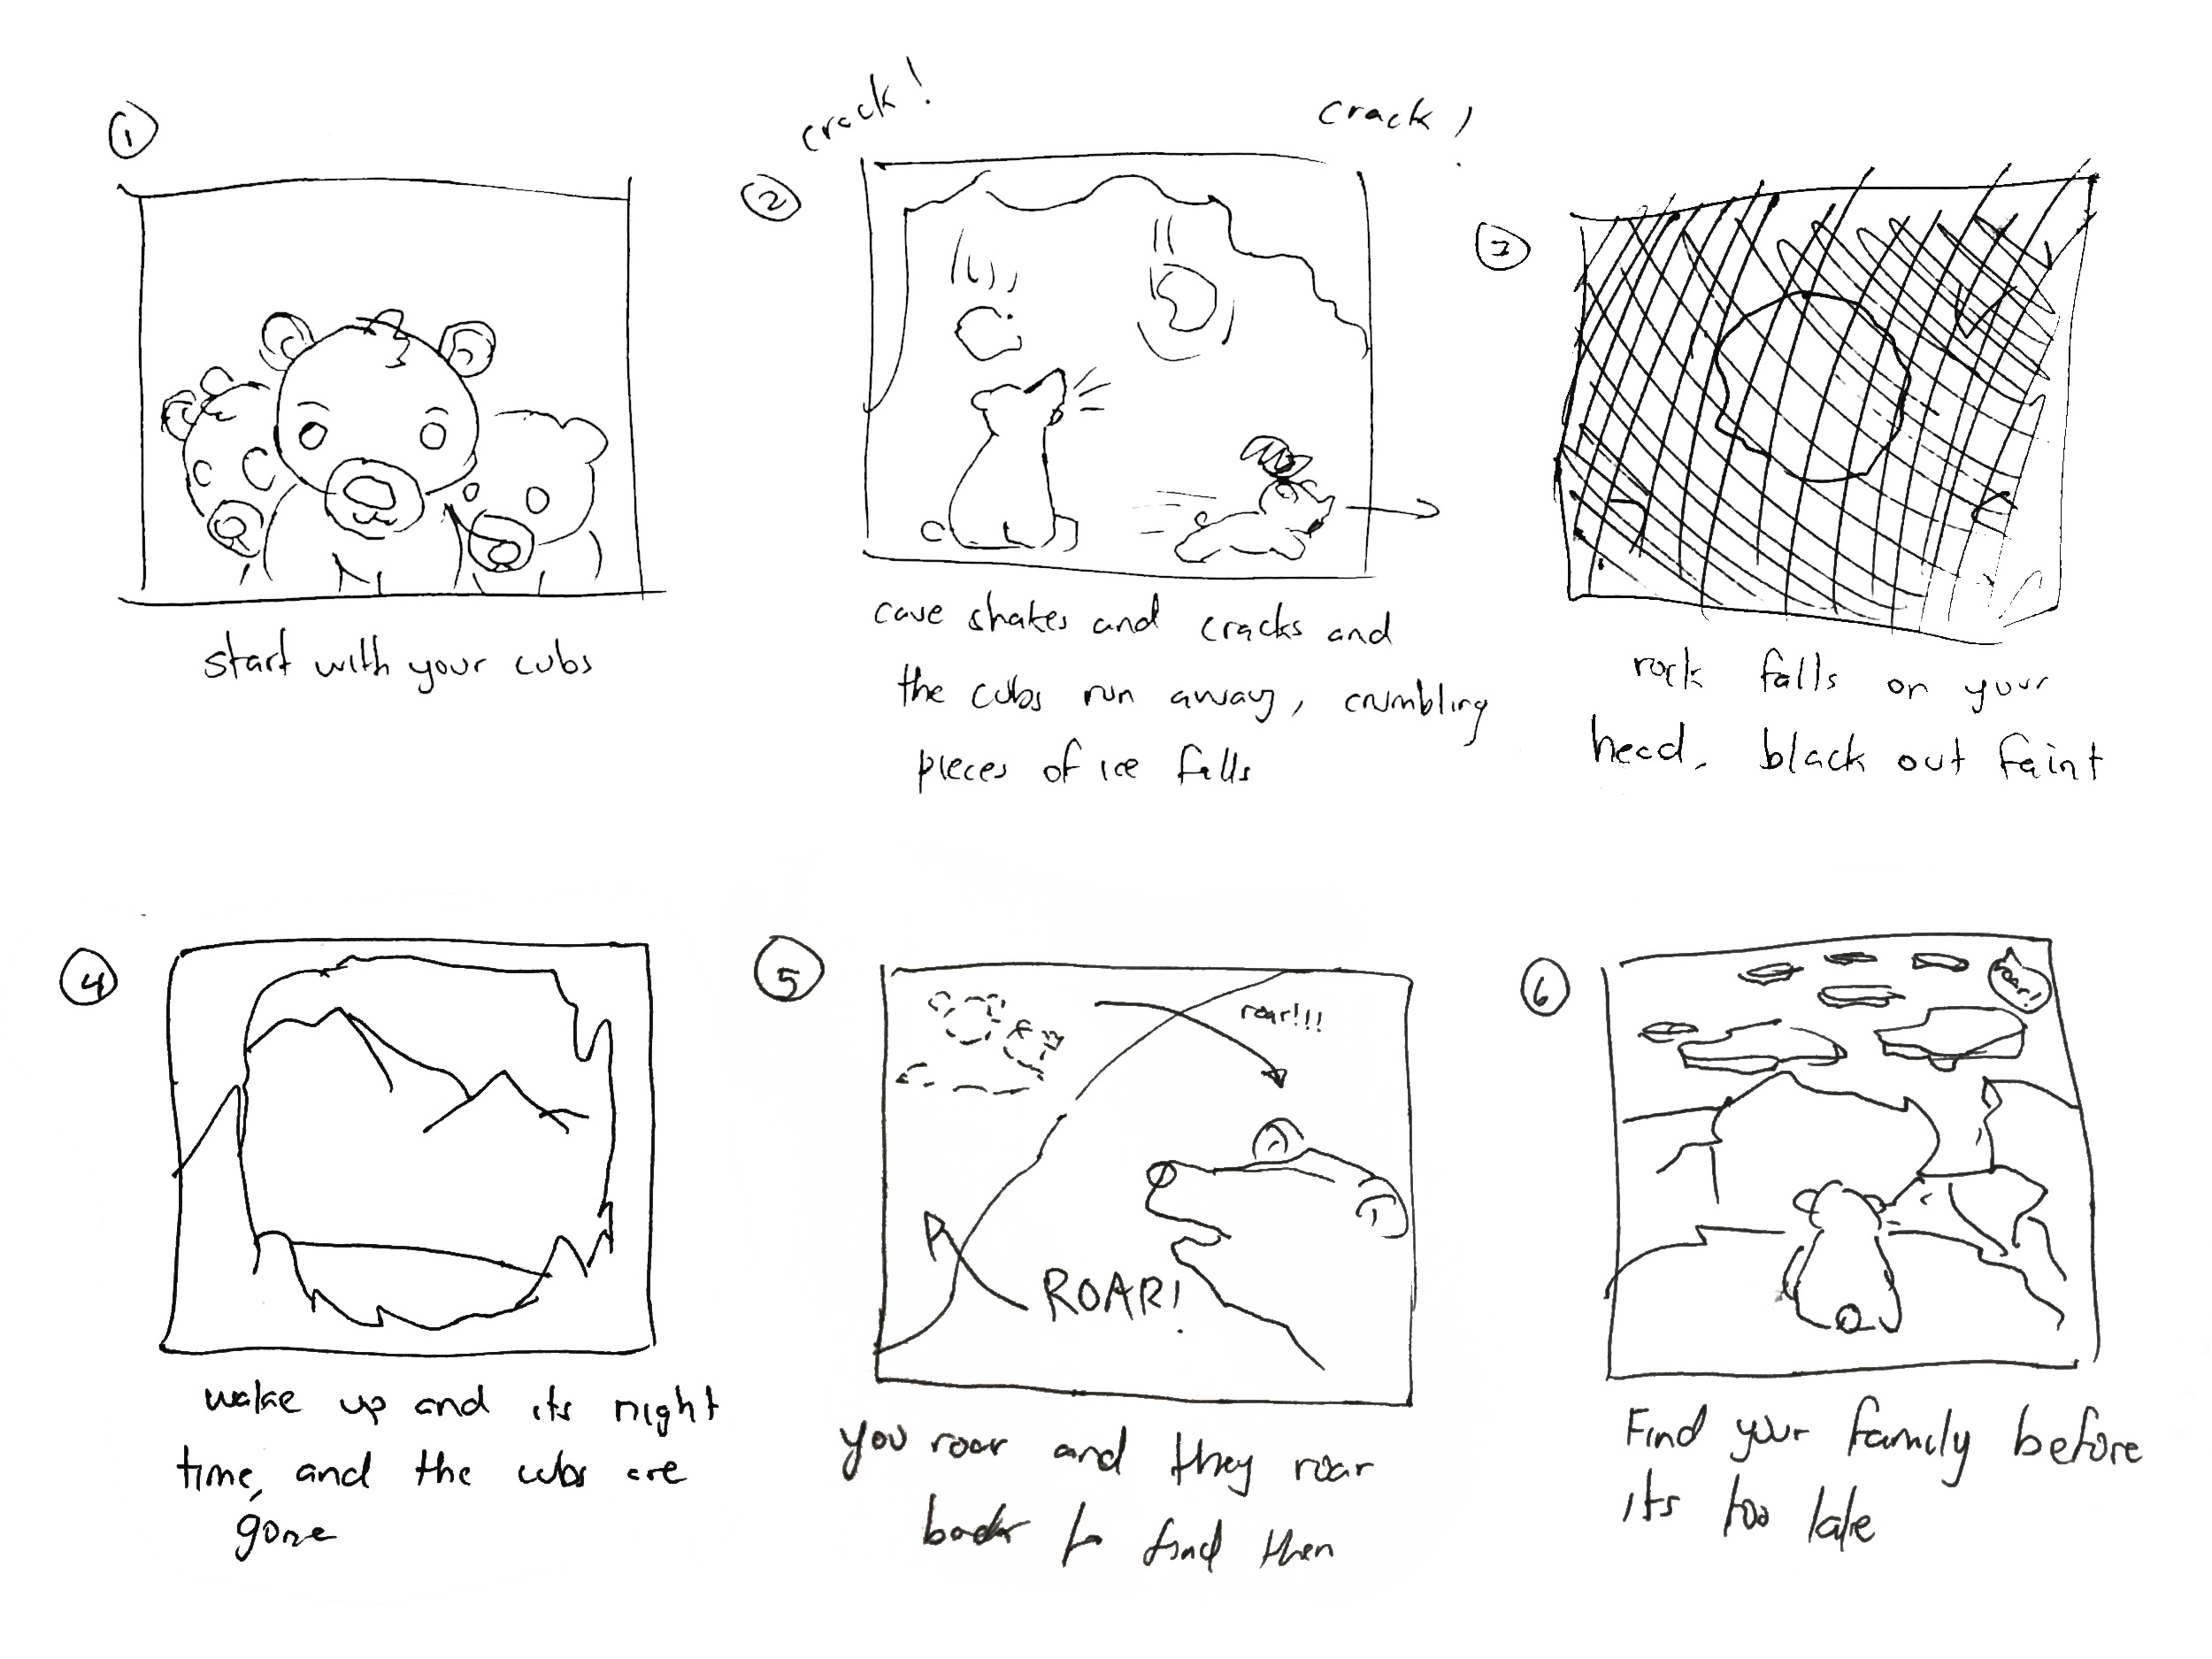 A storyboard sketch of Echo's in-virtual-reality experience